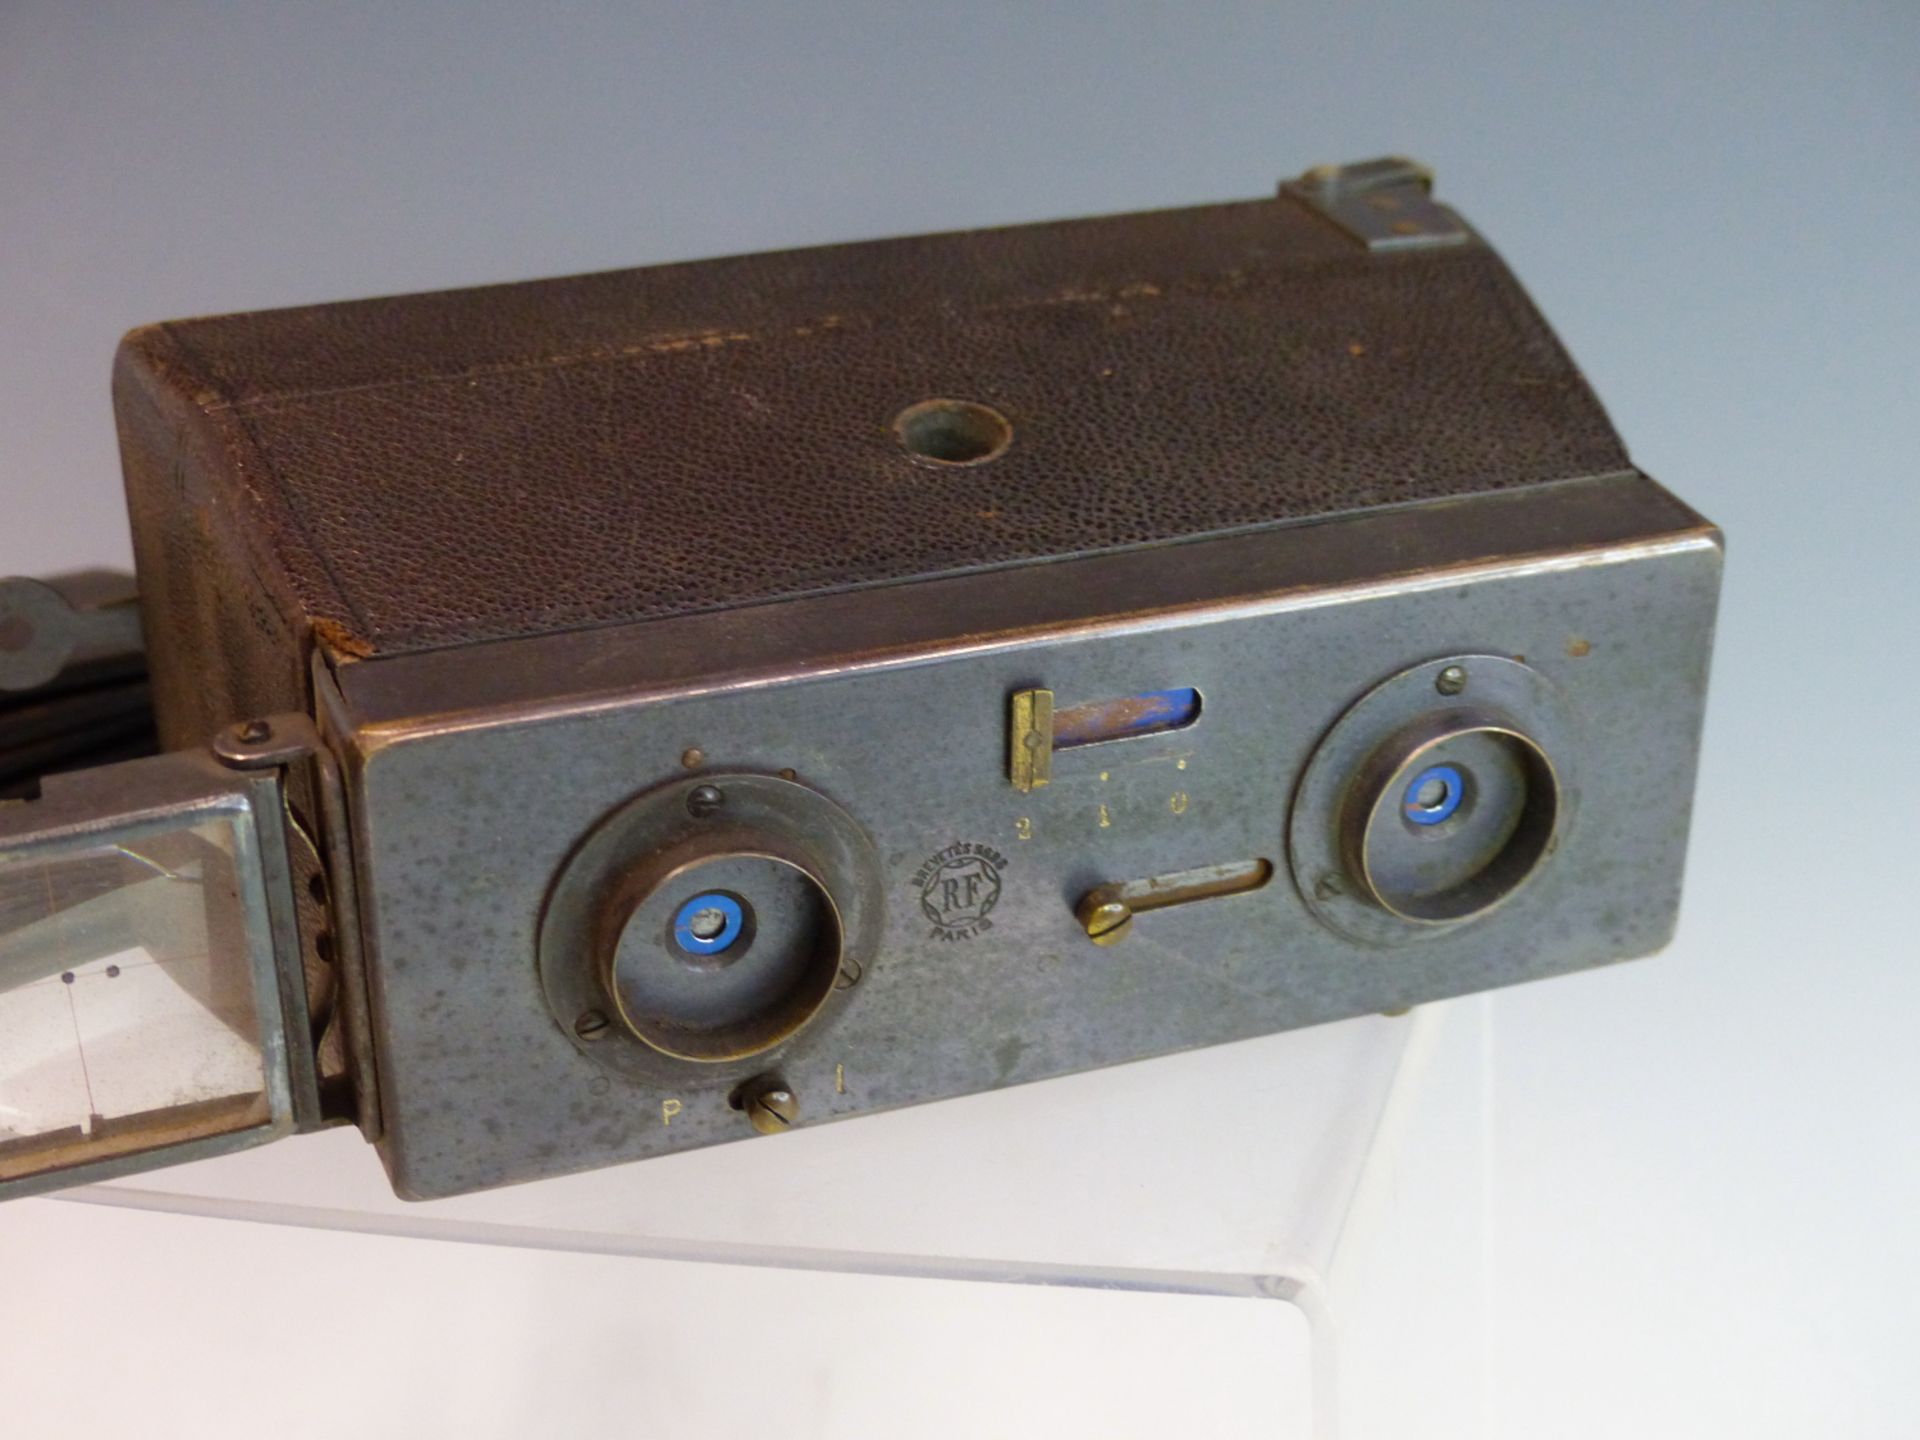 A RARE FRENCH GLYPHOSCOPE STEREOSCOPIC CAMERA BY JULES RICHARD, PARIS. IN ITS ORIGINAL POUCH WITH - Image 2 of 4